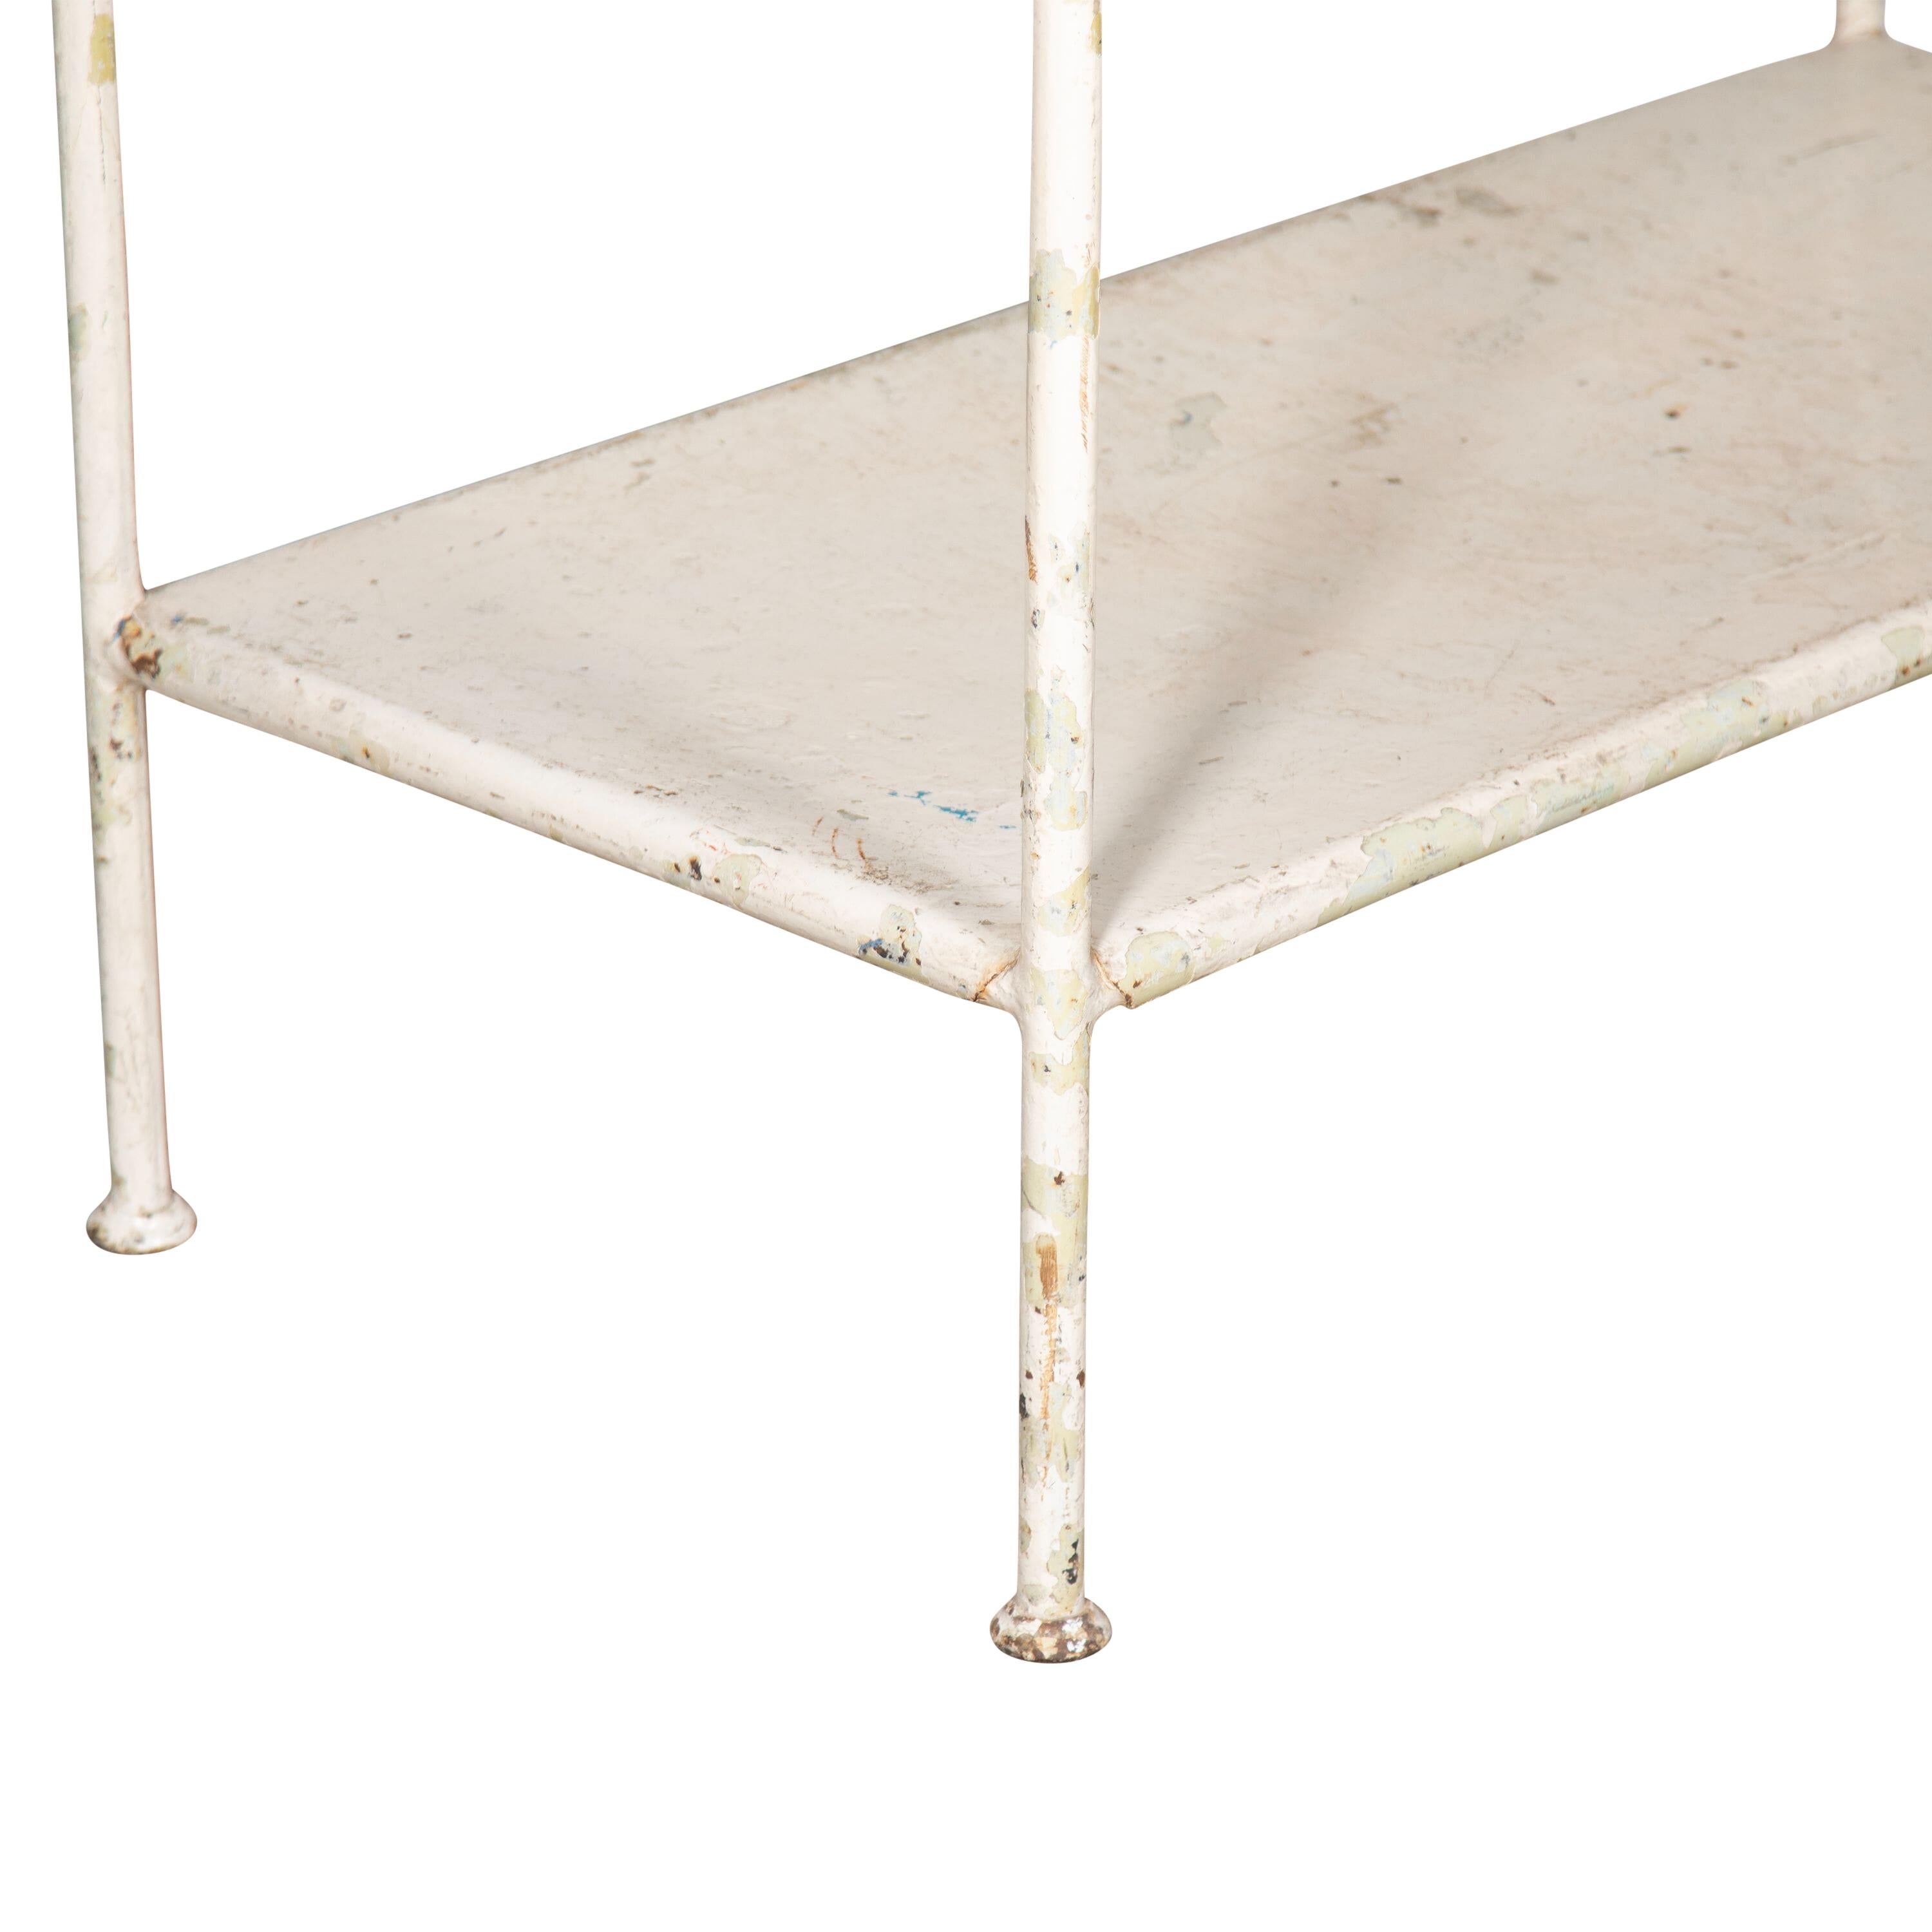 19th Century French cheese display table.
The base is painted metal and the large top is made of porcelain. This would be an ideal kitchen island, folding table in a utility or back as a shop display.